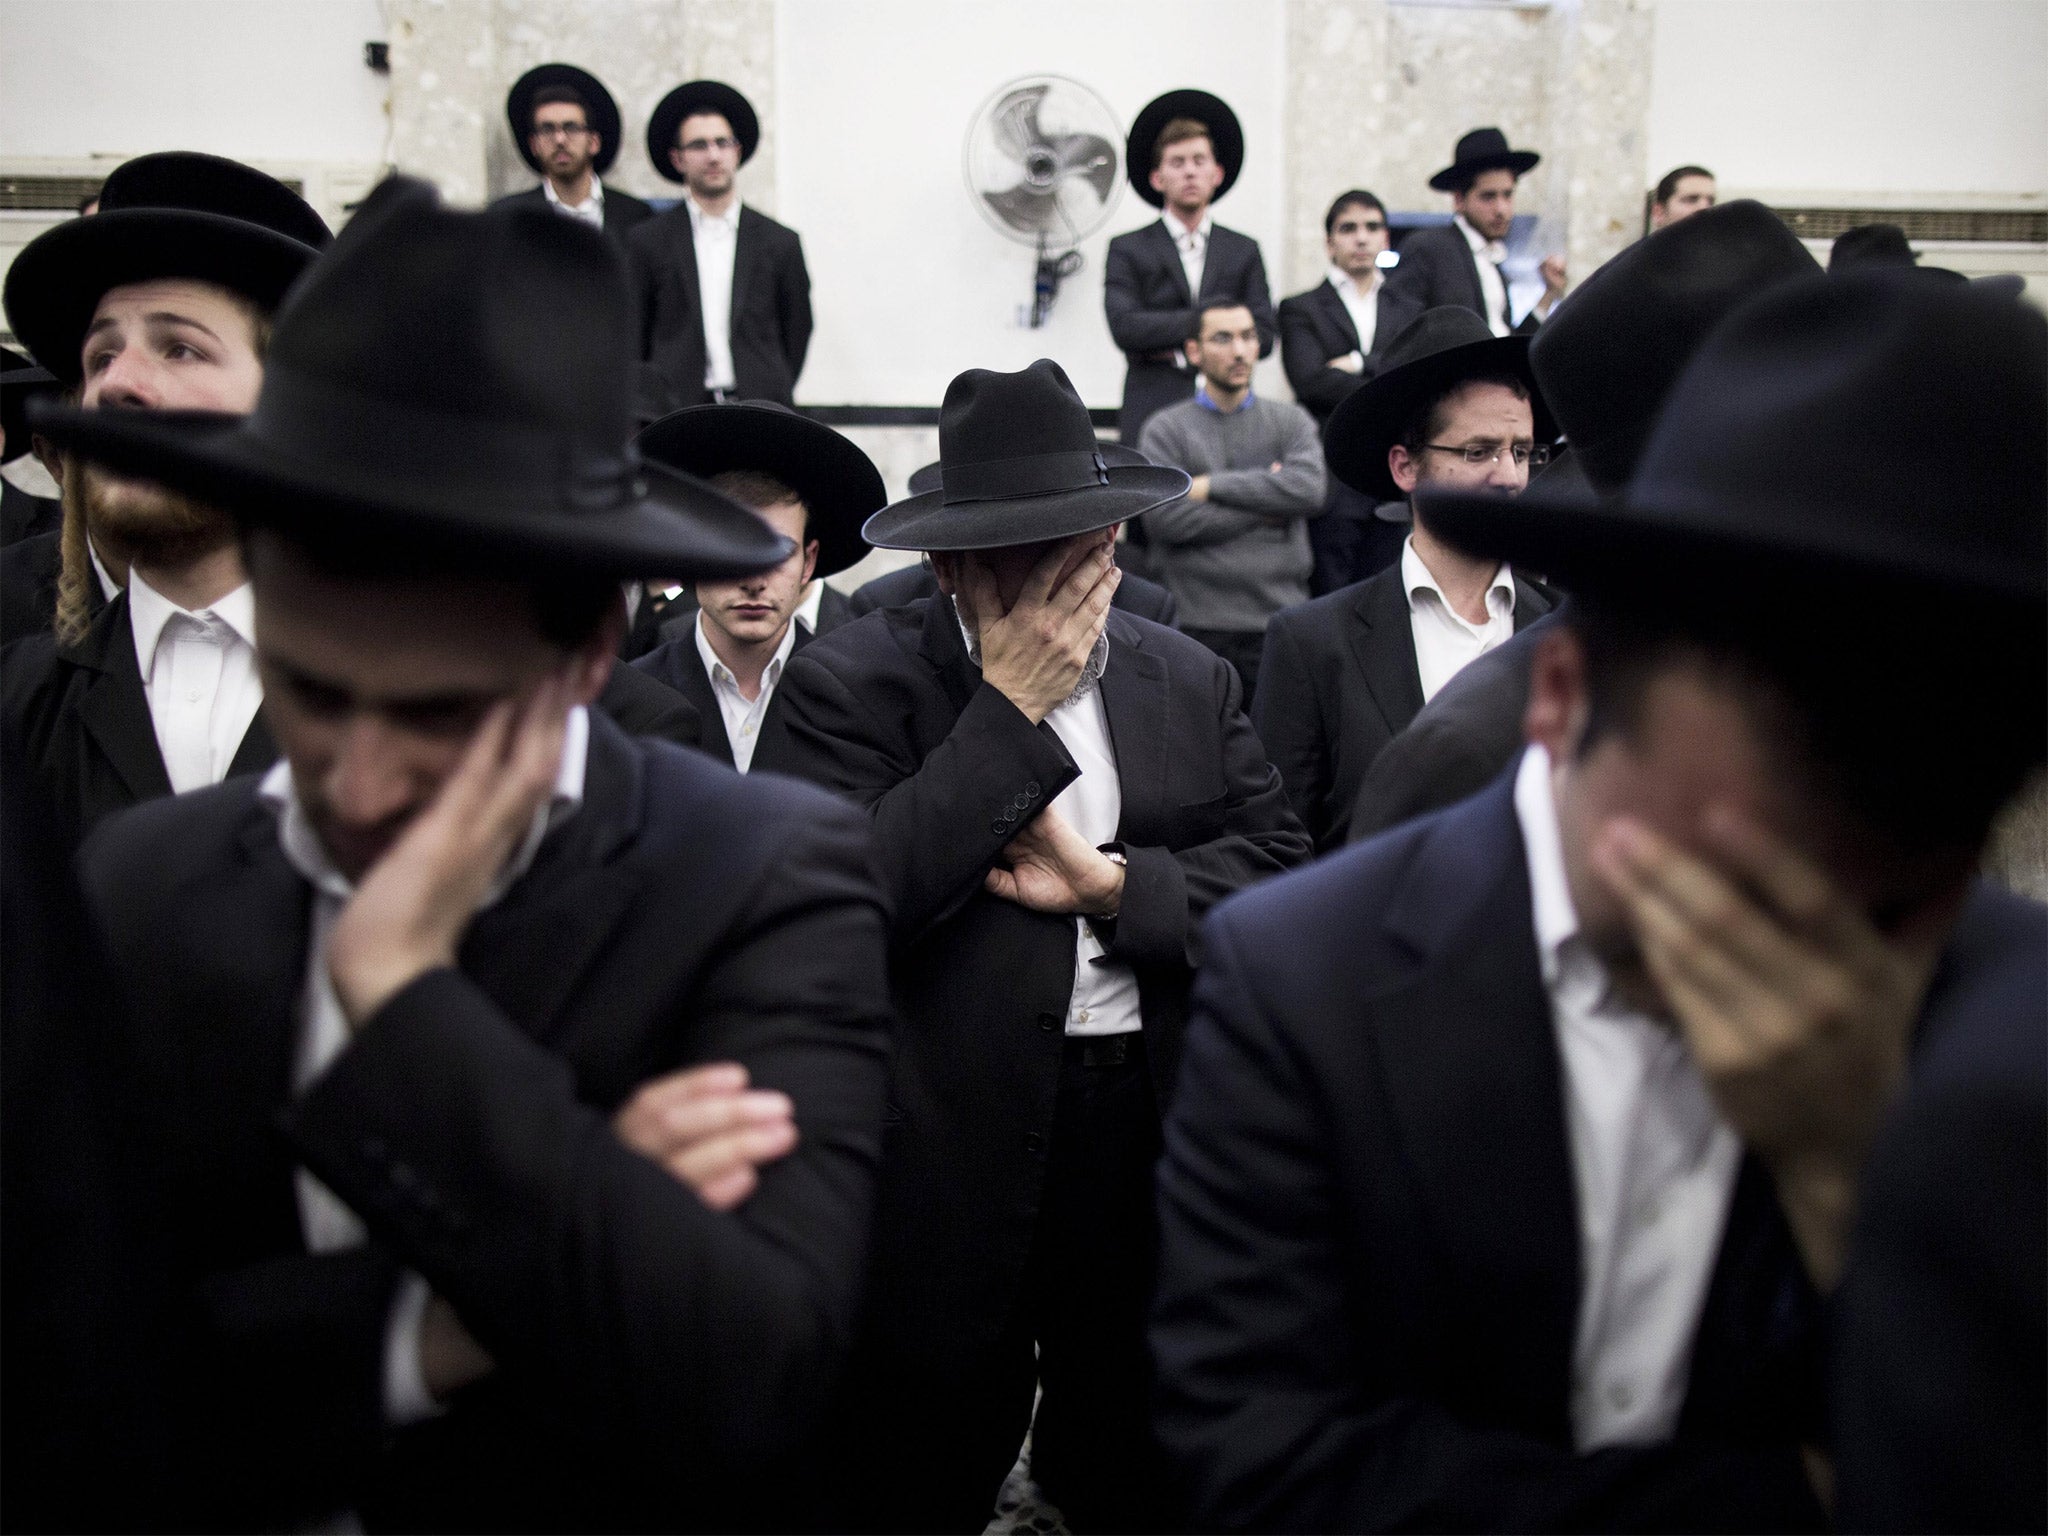 Ultra-Orthodox Jews mourn during a eulogy ceremony ahead of the funeral of Rabbi Moshe Twersky, one of the four jewish victims